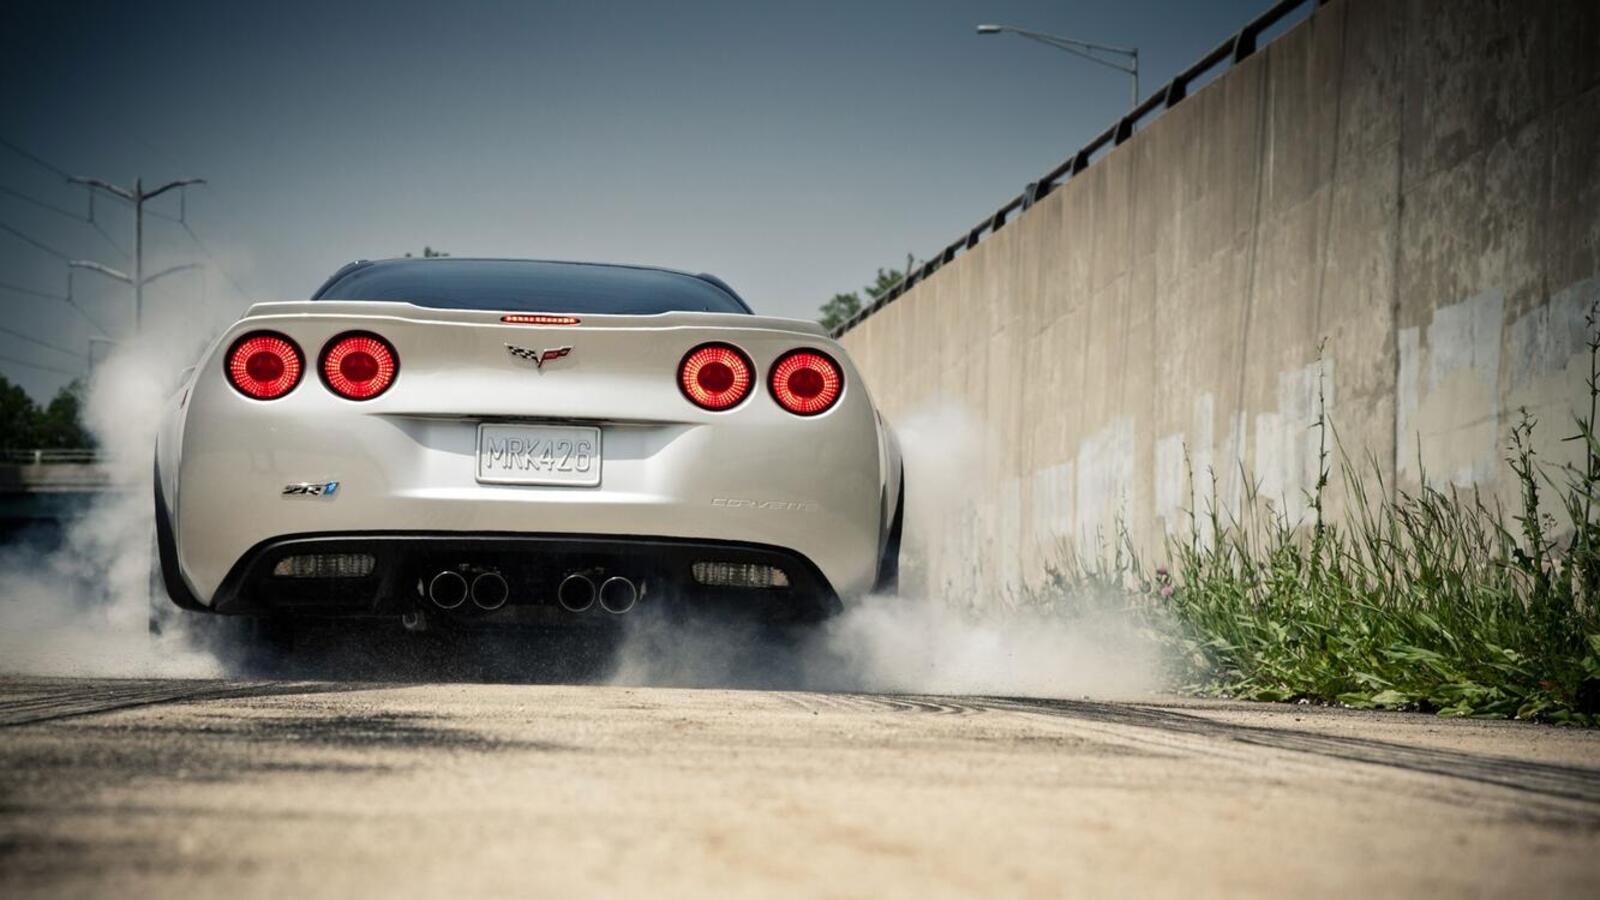 Wallpapers wallpaper chevrolet corvette zr1 view from behind cars on the desktop